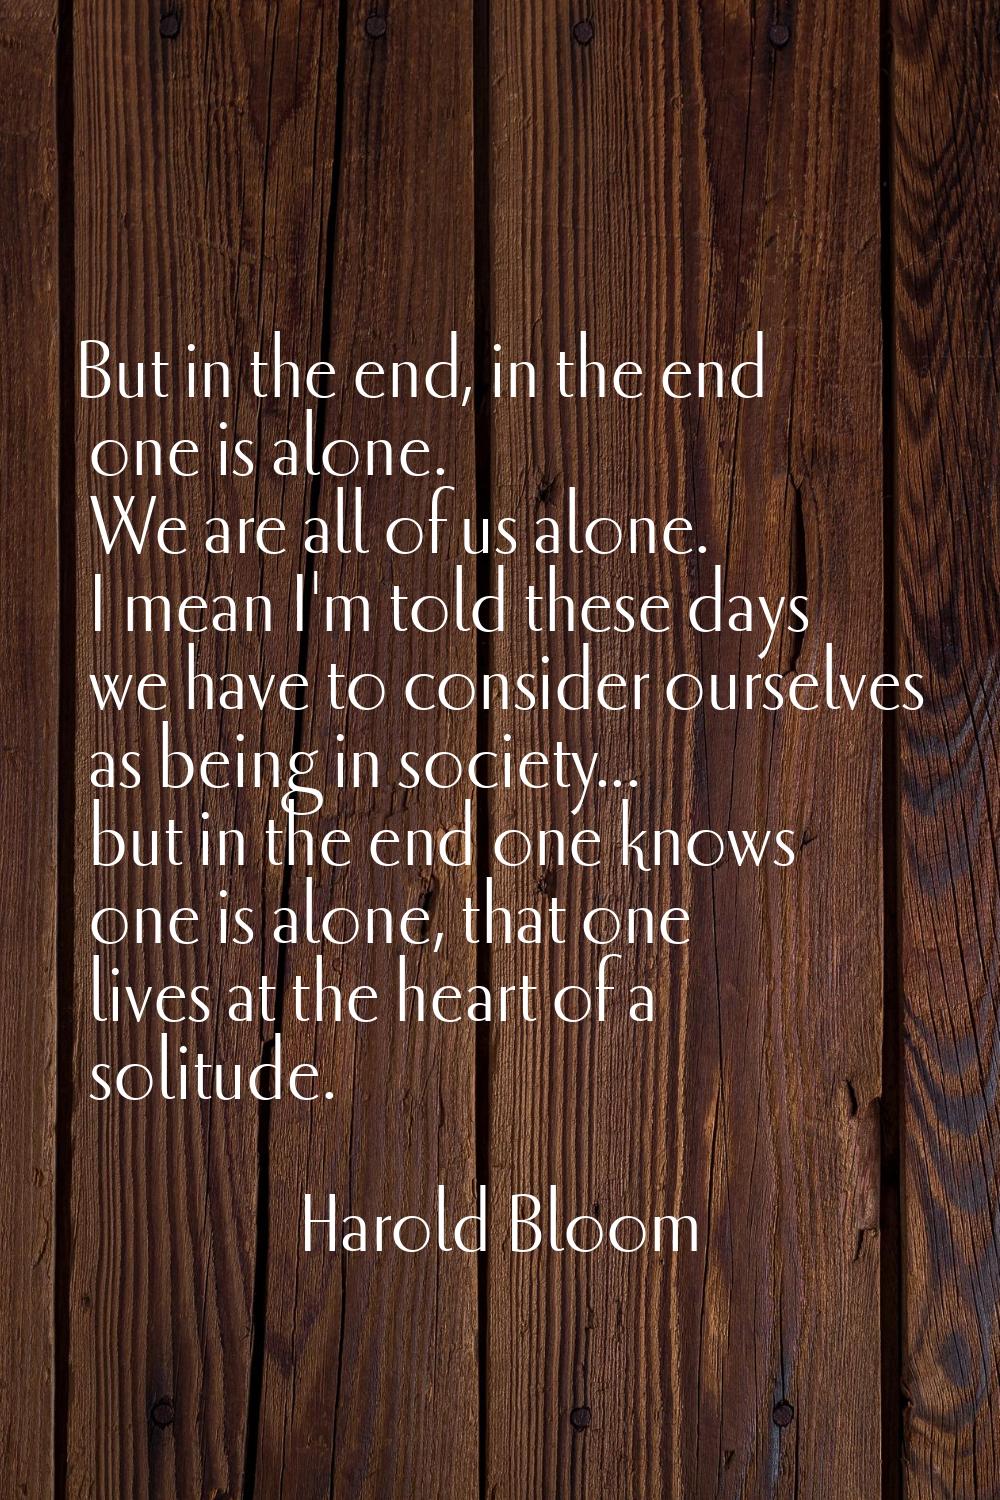 But in the end, in the end one is alone. We are all of us alone. I mean I'm told these days we have